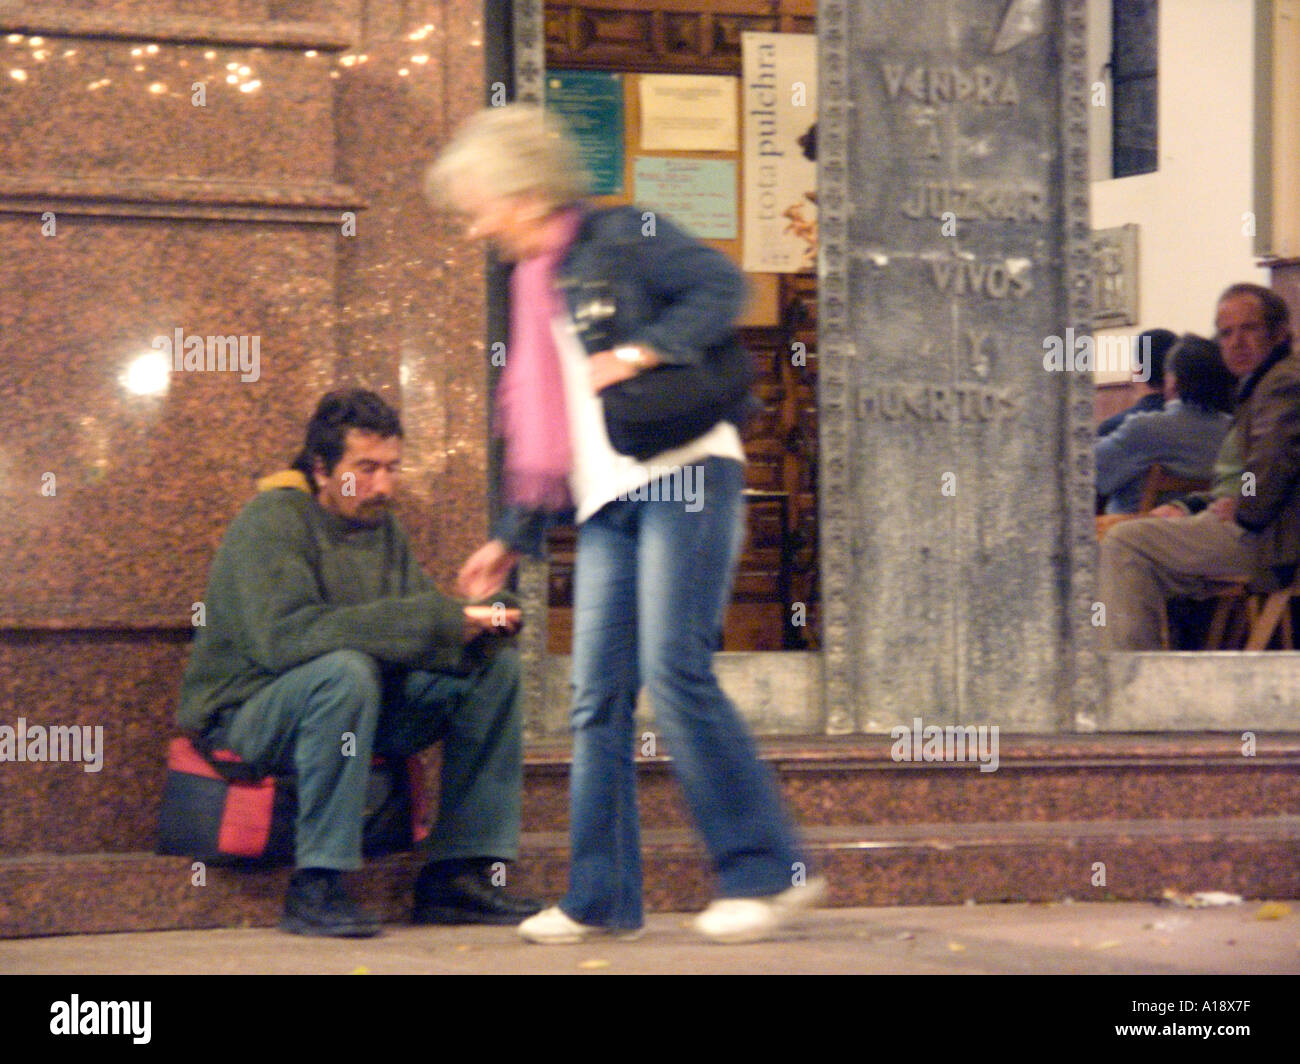 Spanish Homeless Beggar receives a money donation from a kind English lady outside a church at Christmas, homeless homelessness Stock Photo